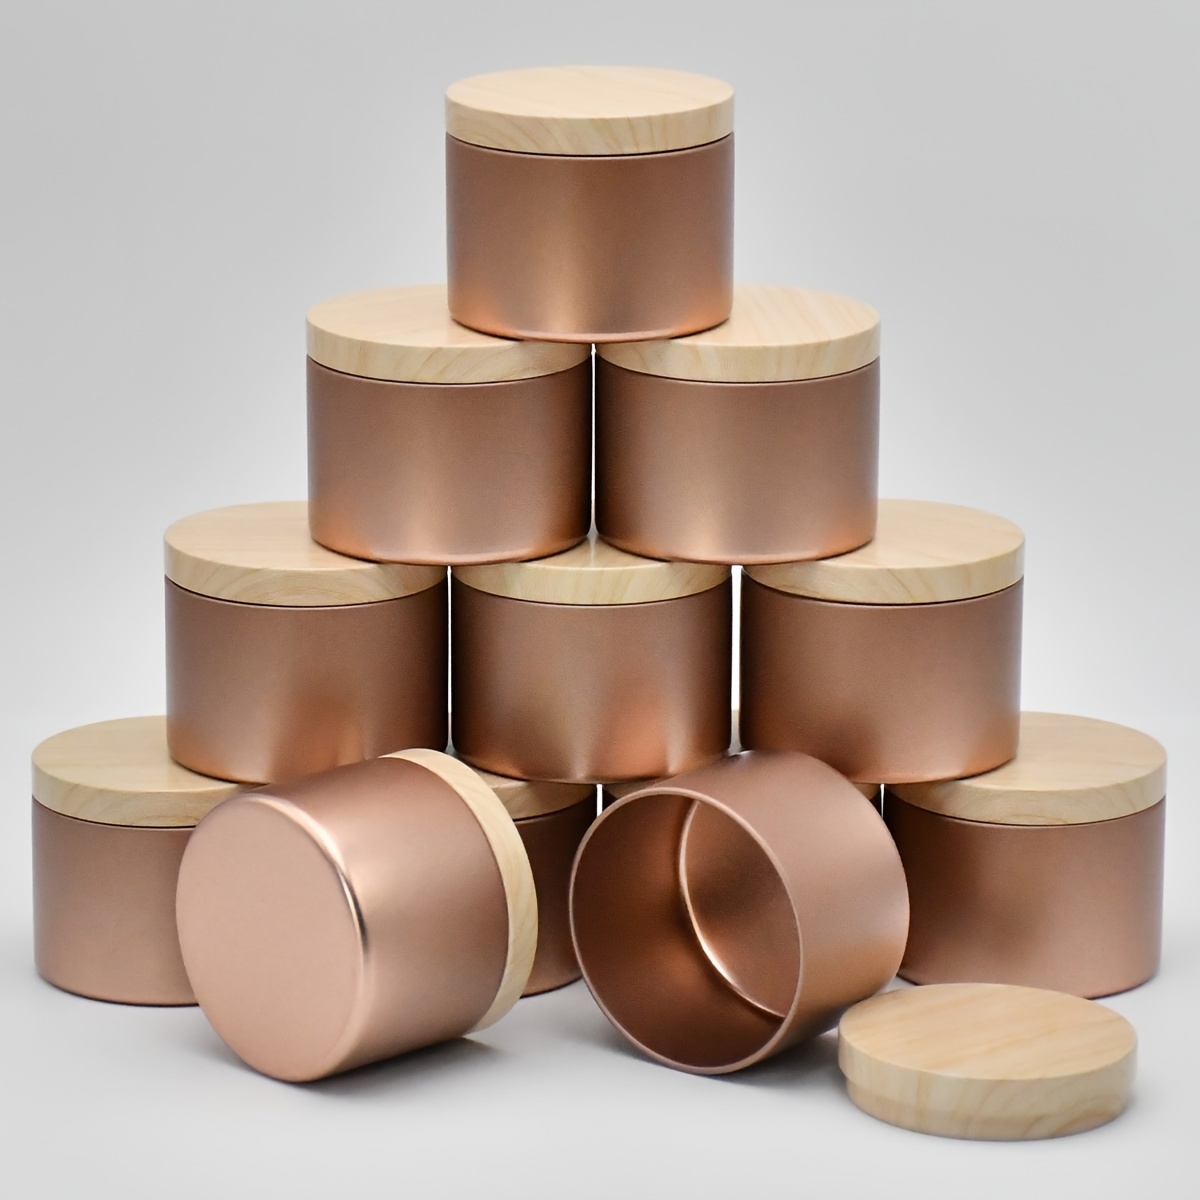 

Set Of 12 Champagne Gold Candle Tins With Lids For Candle Making - Iron Container 4oz And 8oz Combo Pack